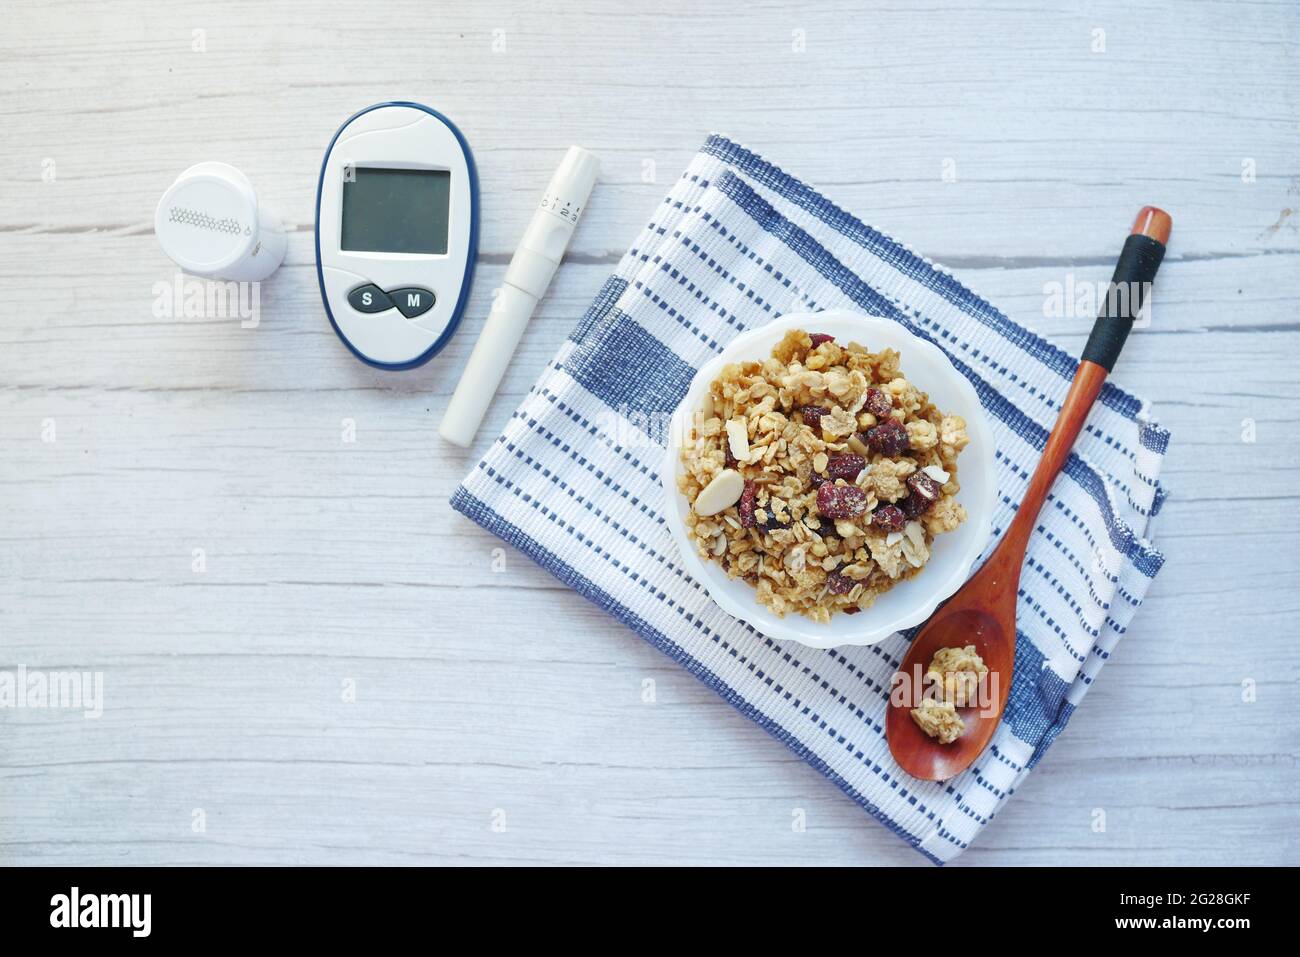 diabetic measurement tools and breakfast cereal in a bowl on table  Stock Photo